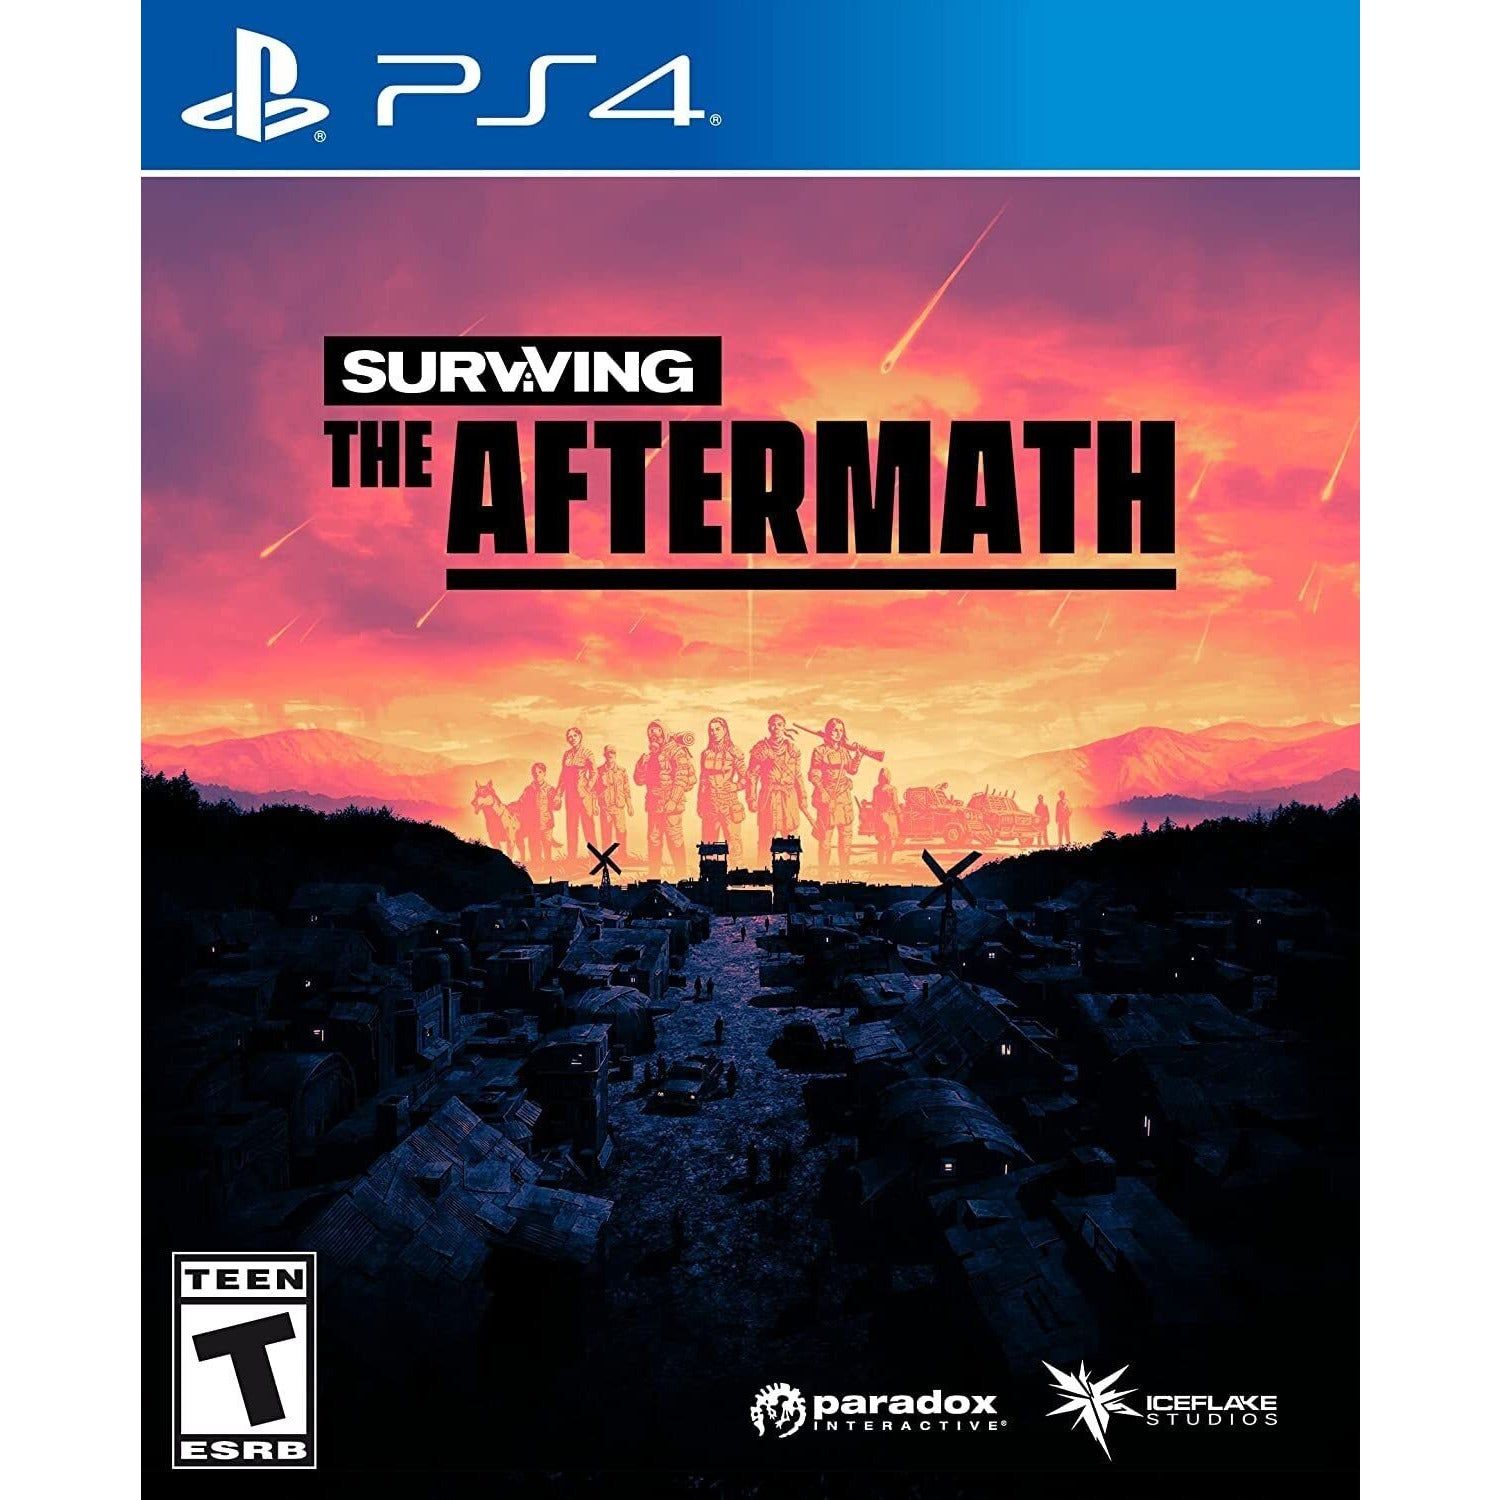 PS4 - Surviving the Aftermath